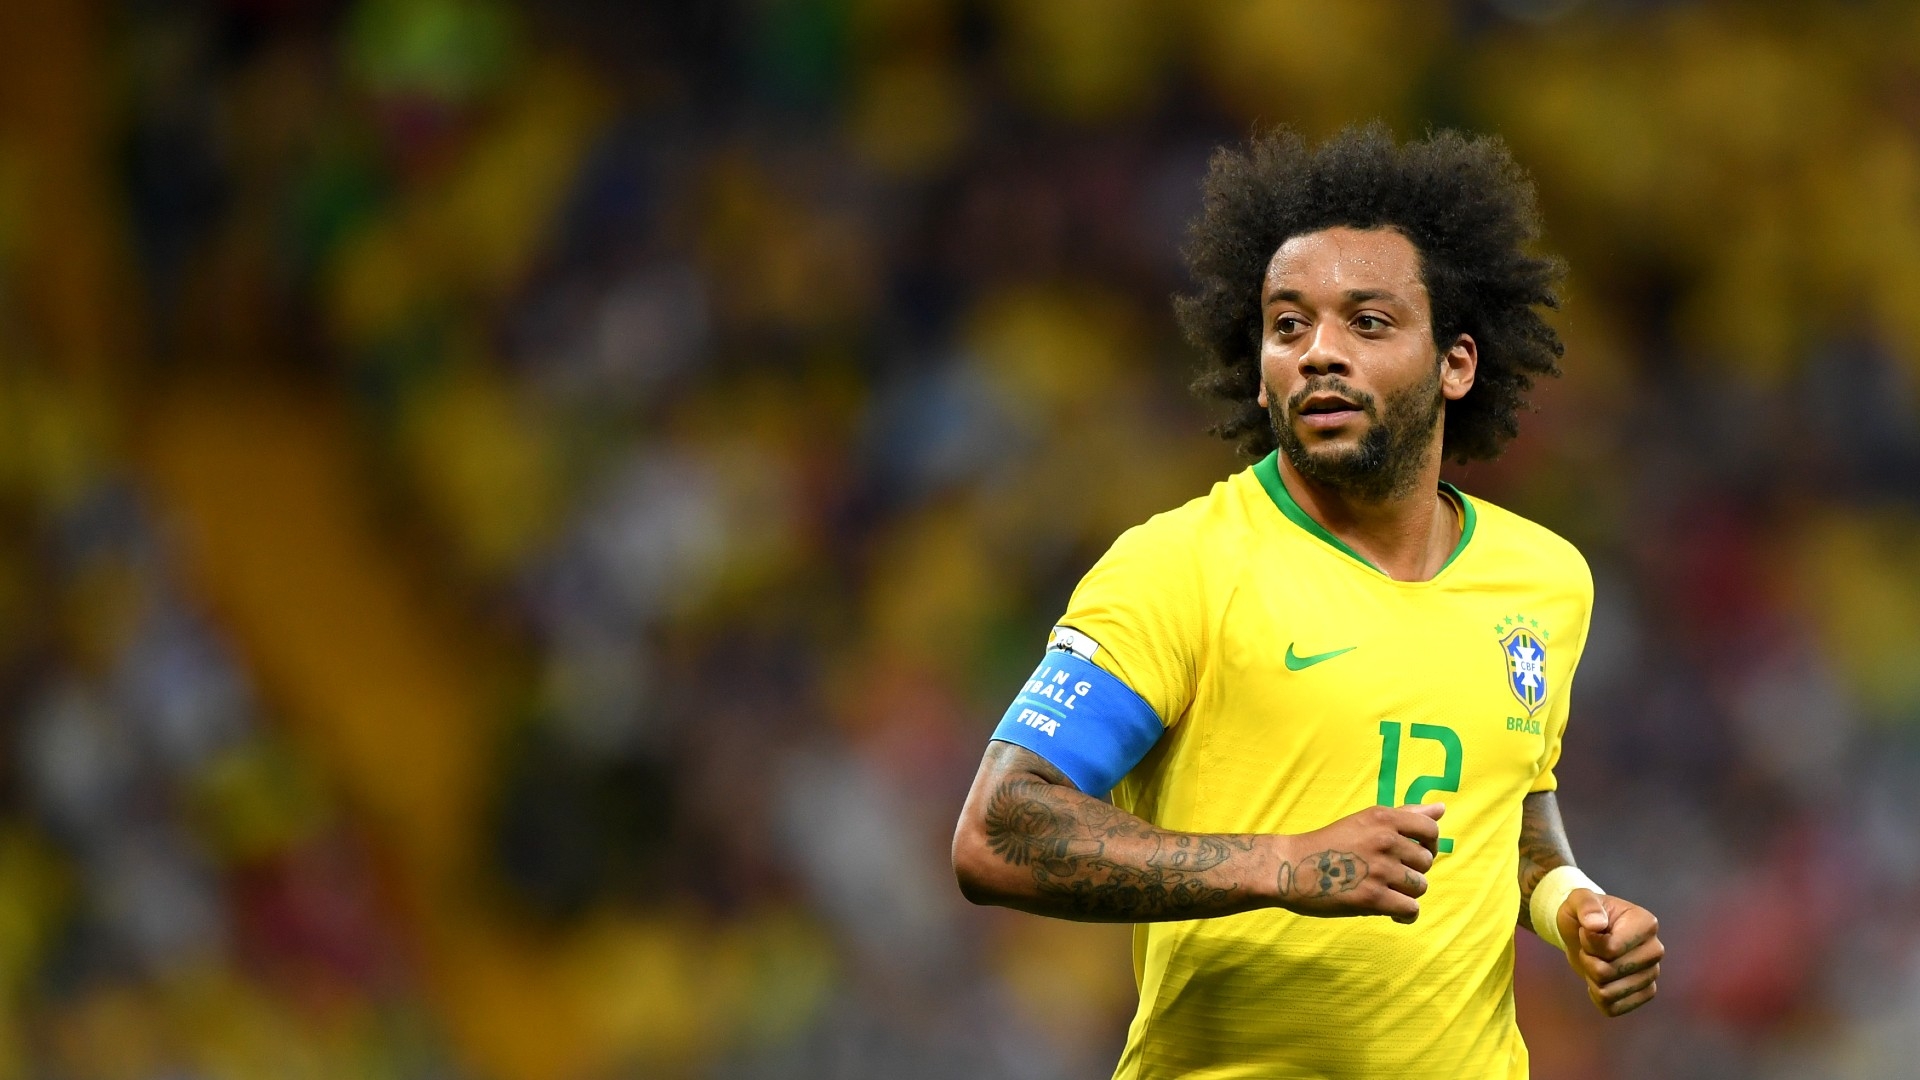 A true football legend' - Olympiacos announce signing of Marcelo after  Brazilian left-back left Real Madrid as free-agent  India